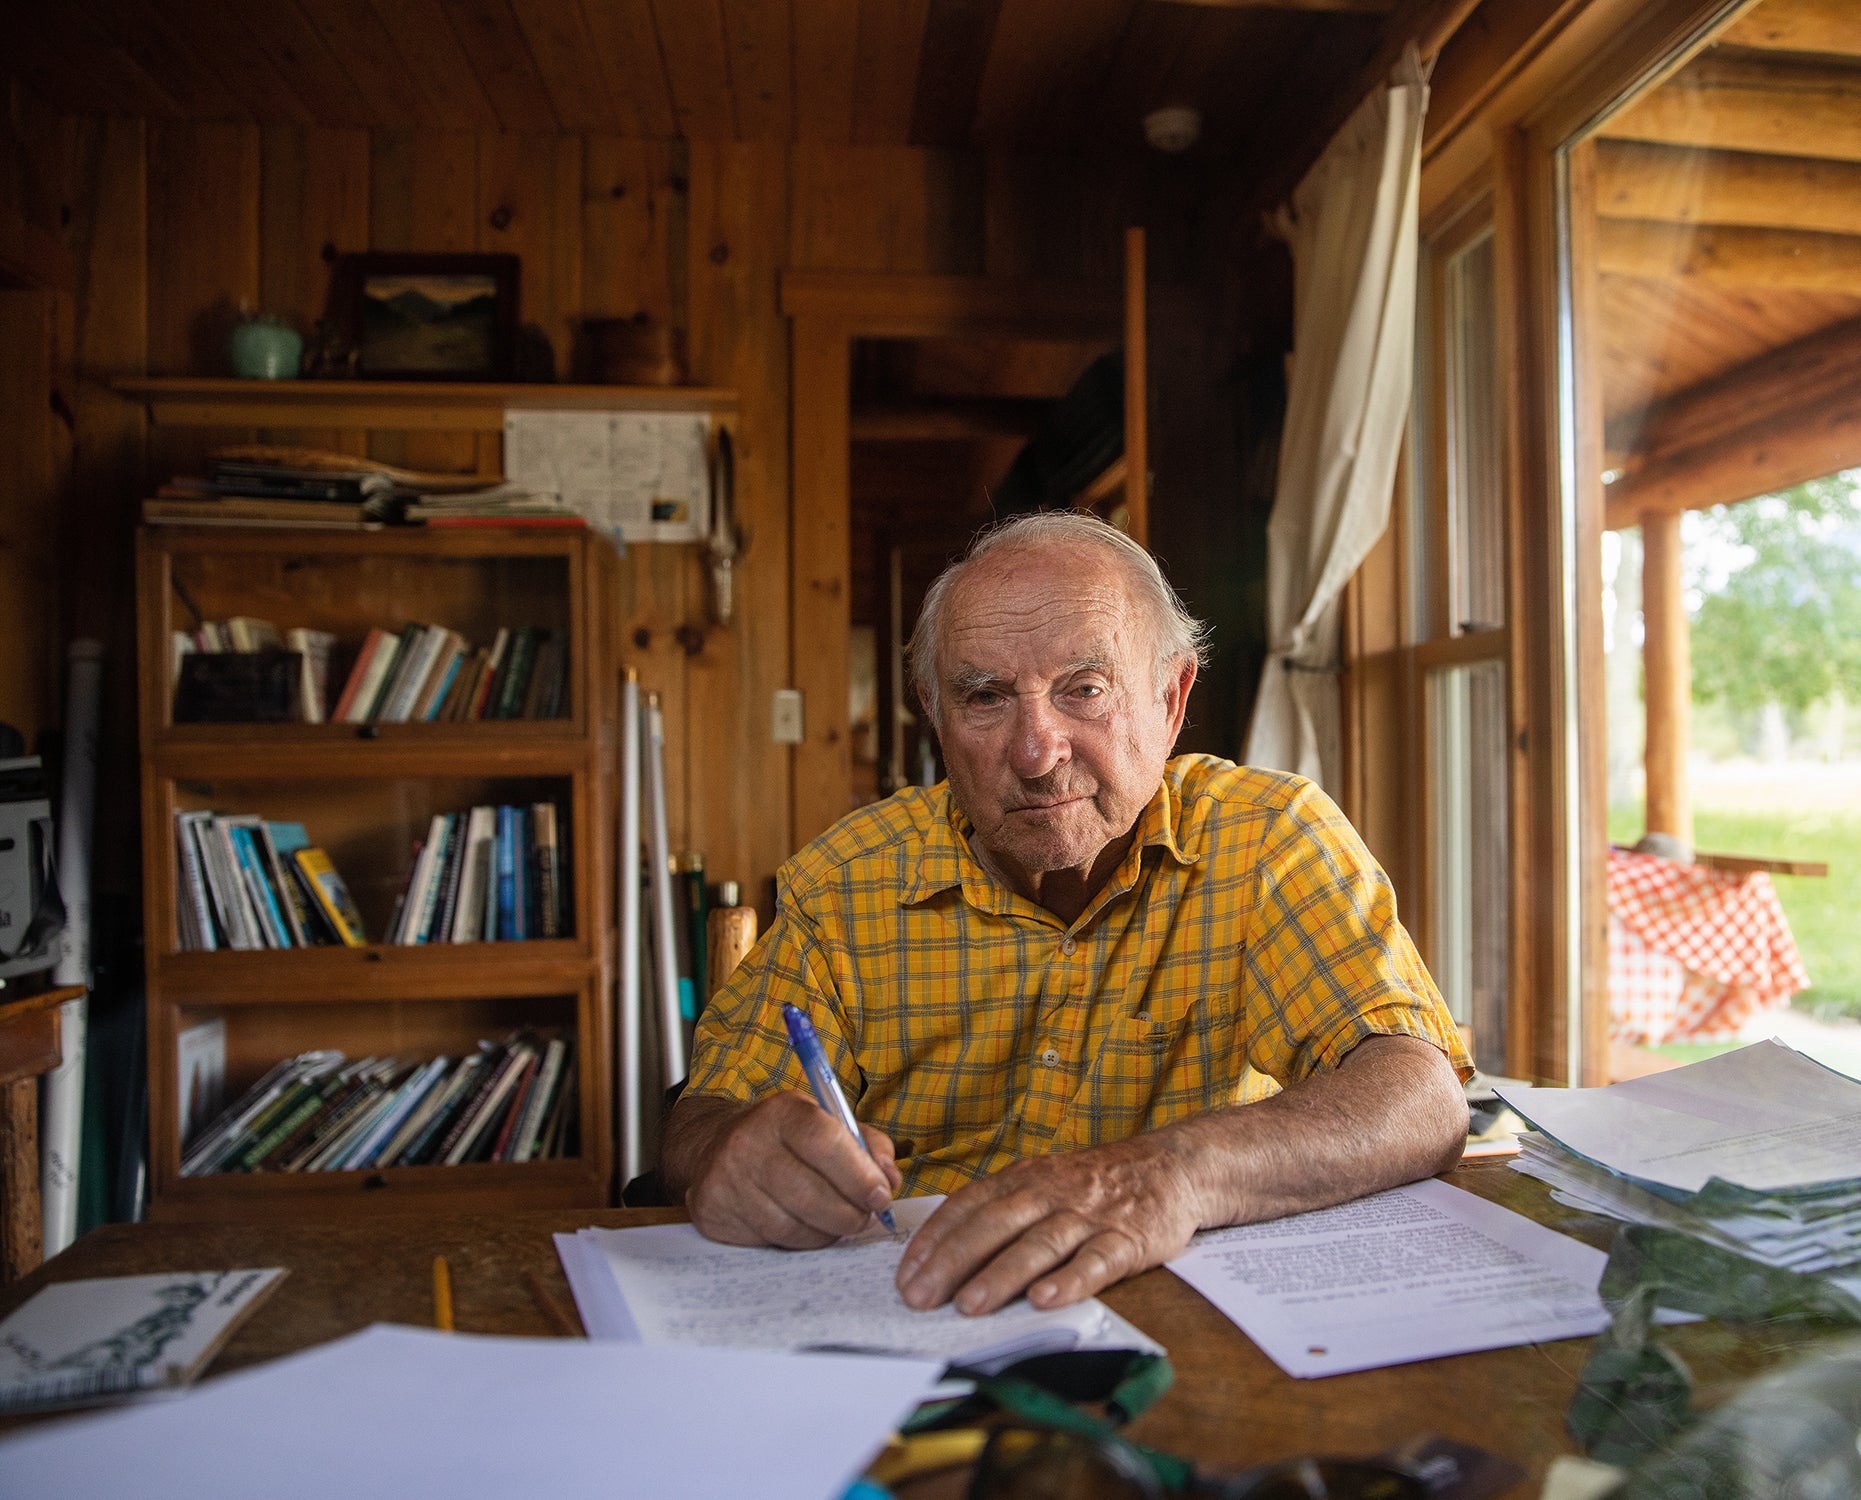 Yvon Chouinard set up the company from his love of rock climbing